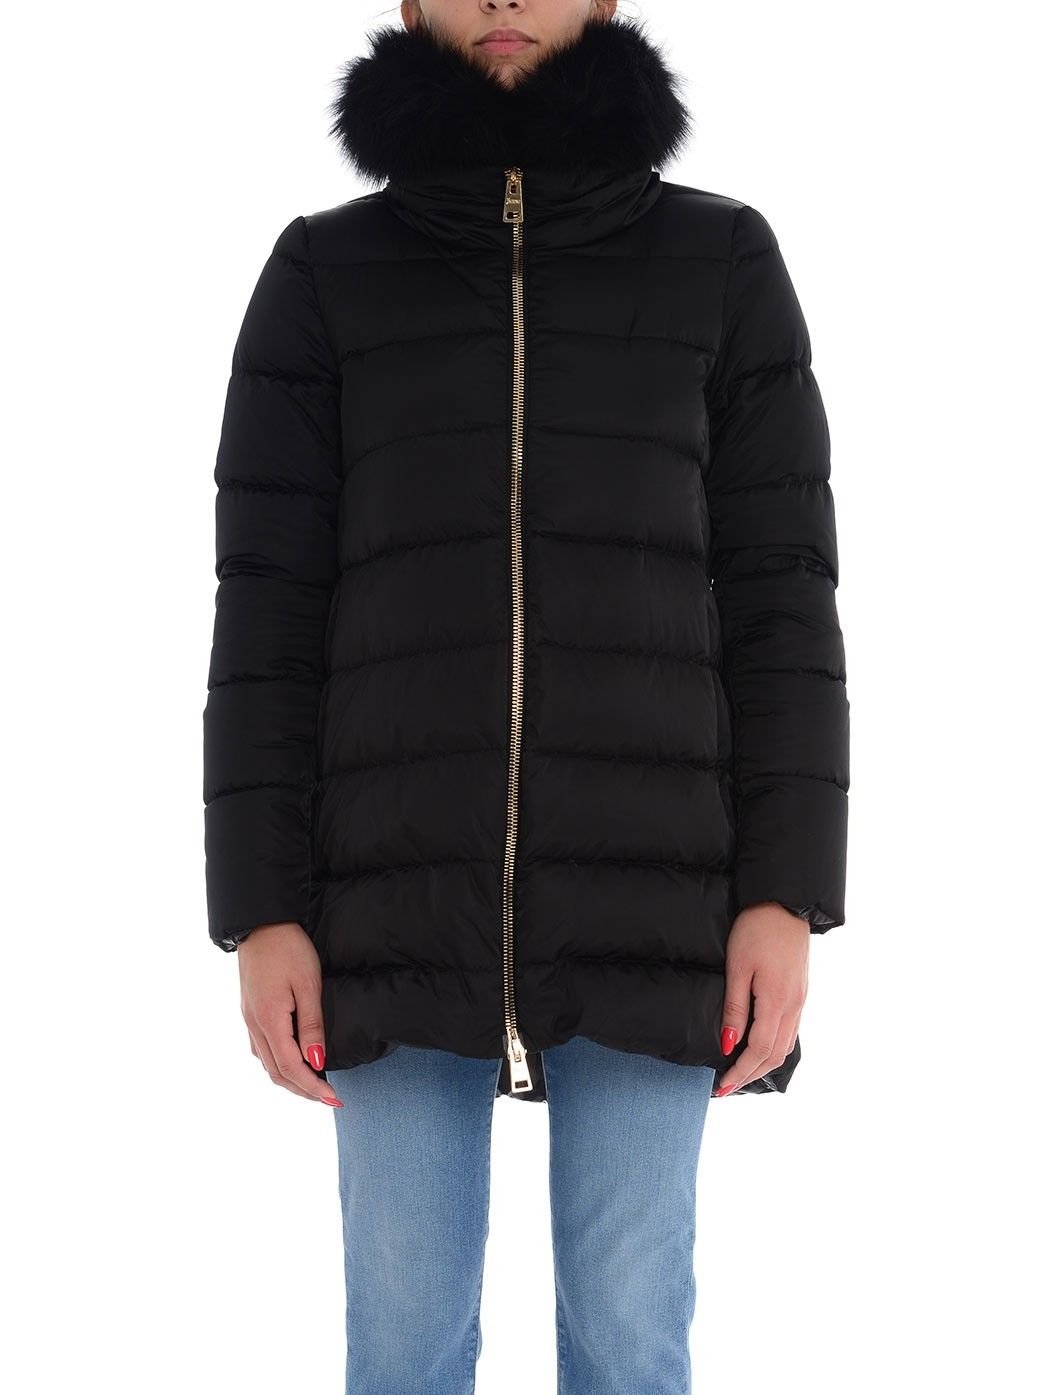  down jackets,removable hoods,WOMEN DOWN JACKETS,MONCLER PADDED JACKETS,WOOLRICH ARCTIC PARKA,HERNO DOWN JACKETS  HERNO PI0670D-12170